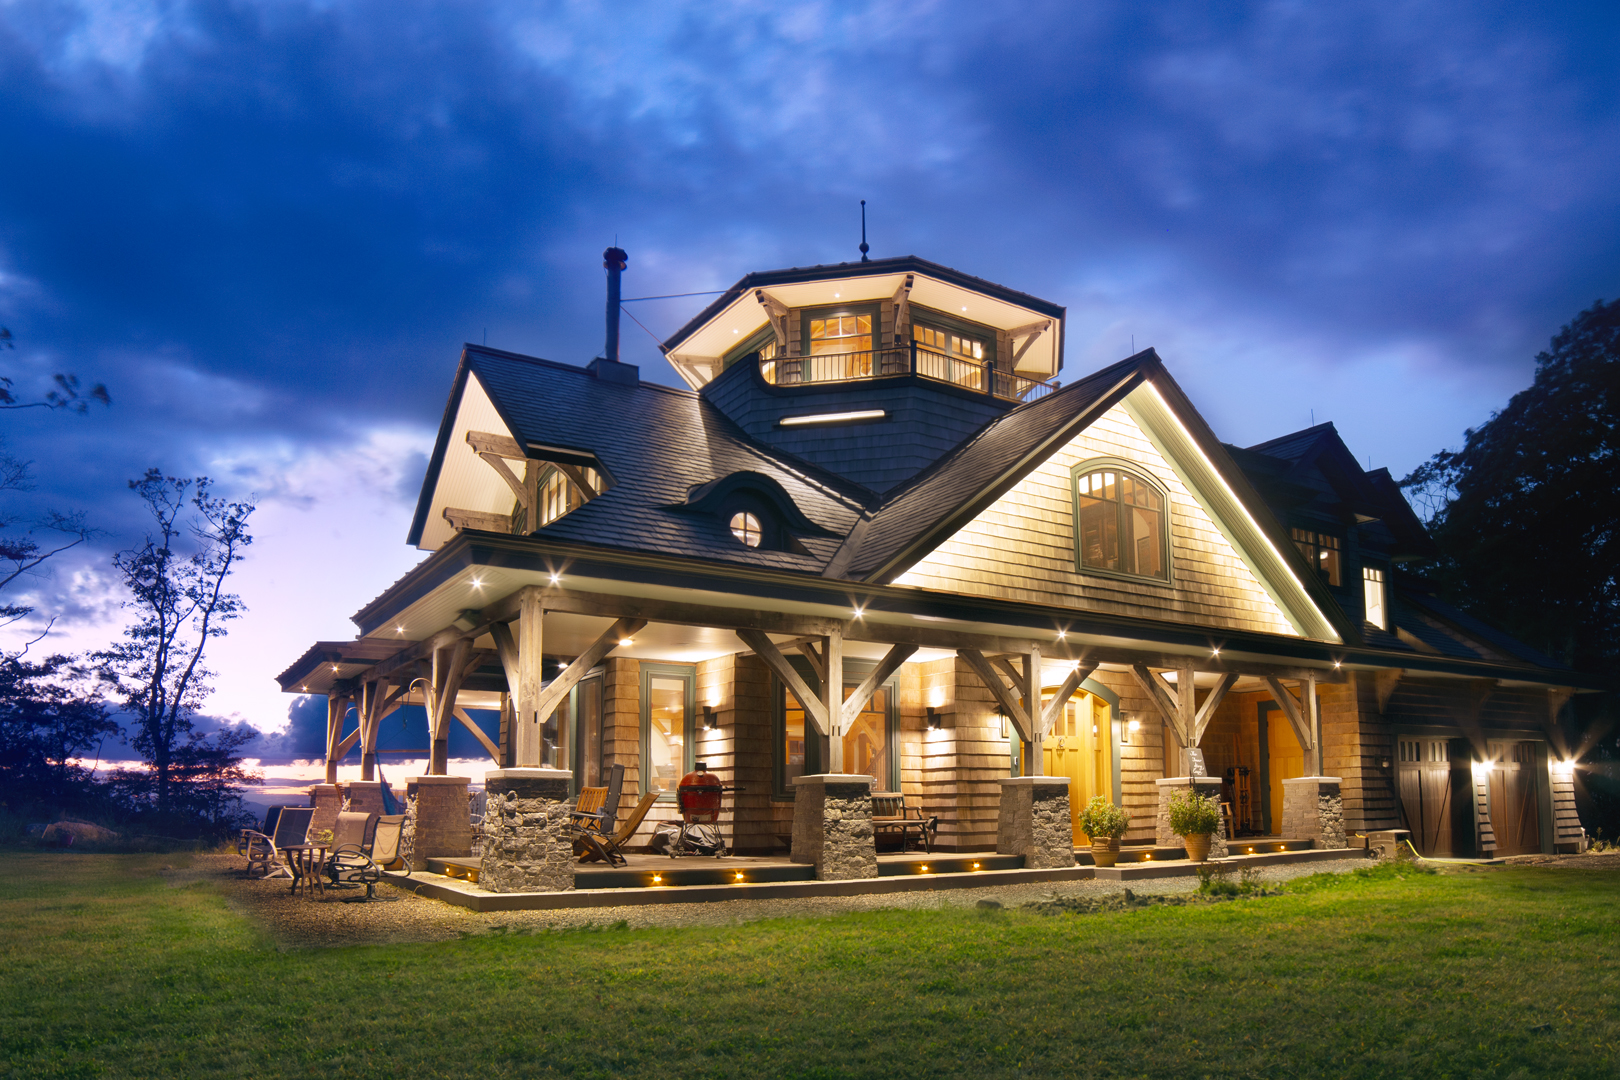 Magical Custom Timber Frame Home in The Berkshires, MA